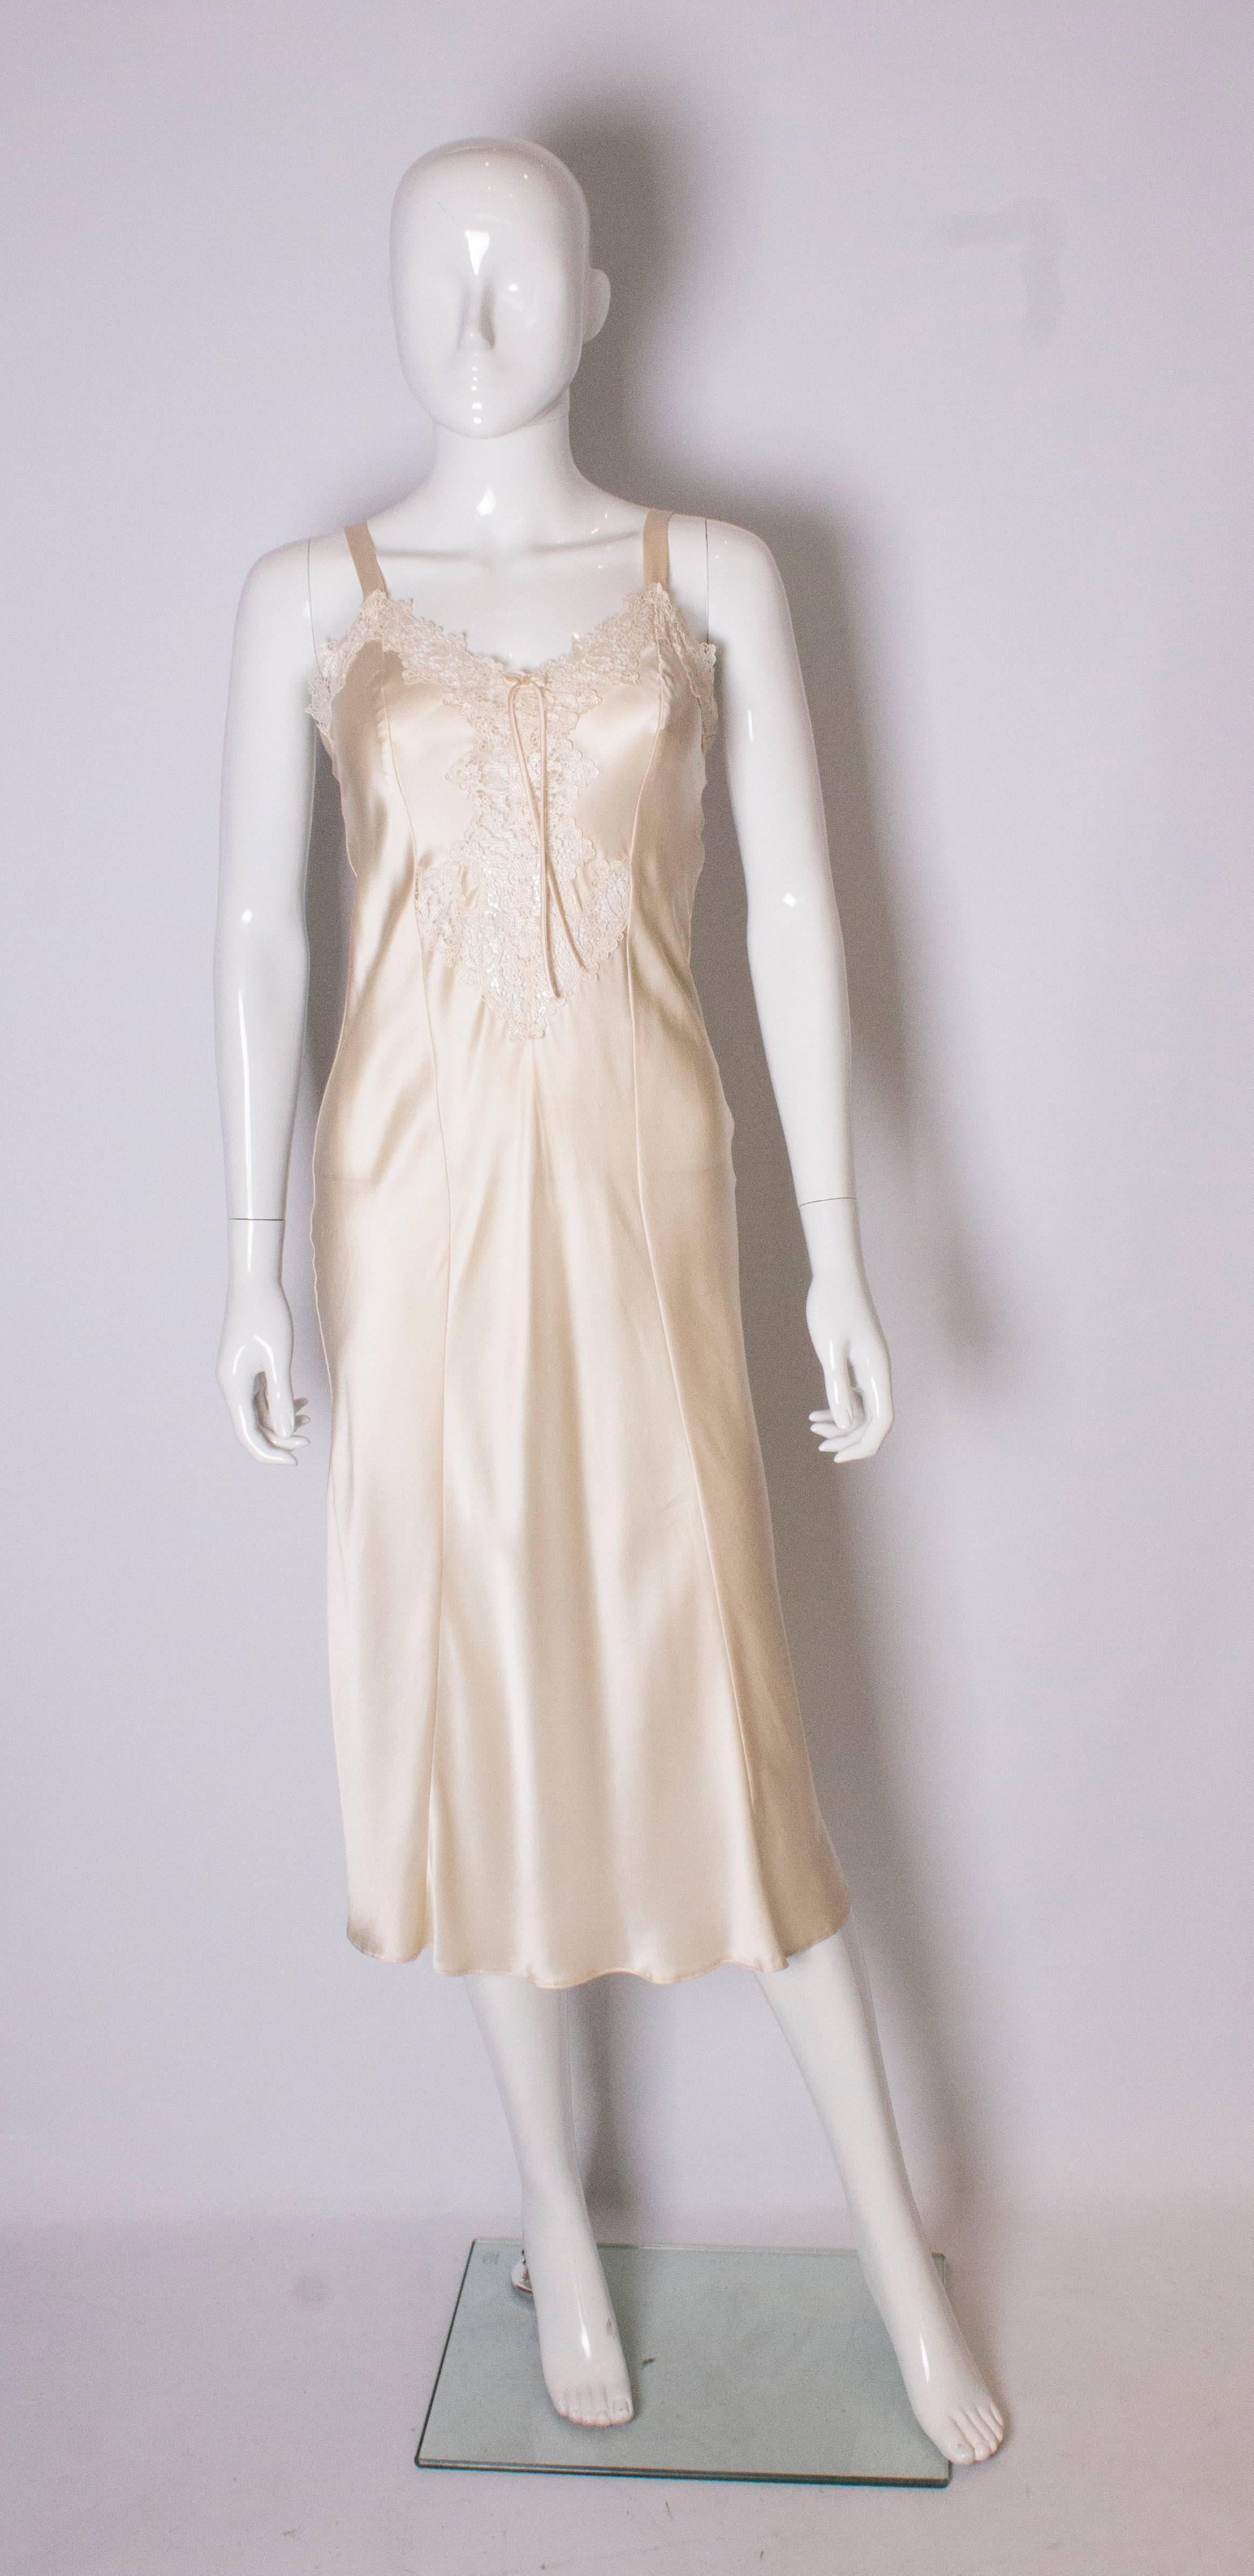 A charming silk night dress by David Nieper. In a heavy ivory silk , the nightdress has a pretty lace insert at the front.